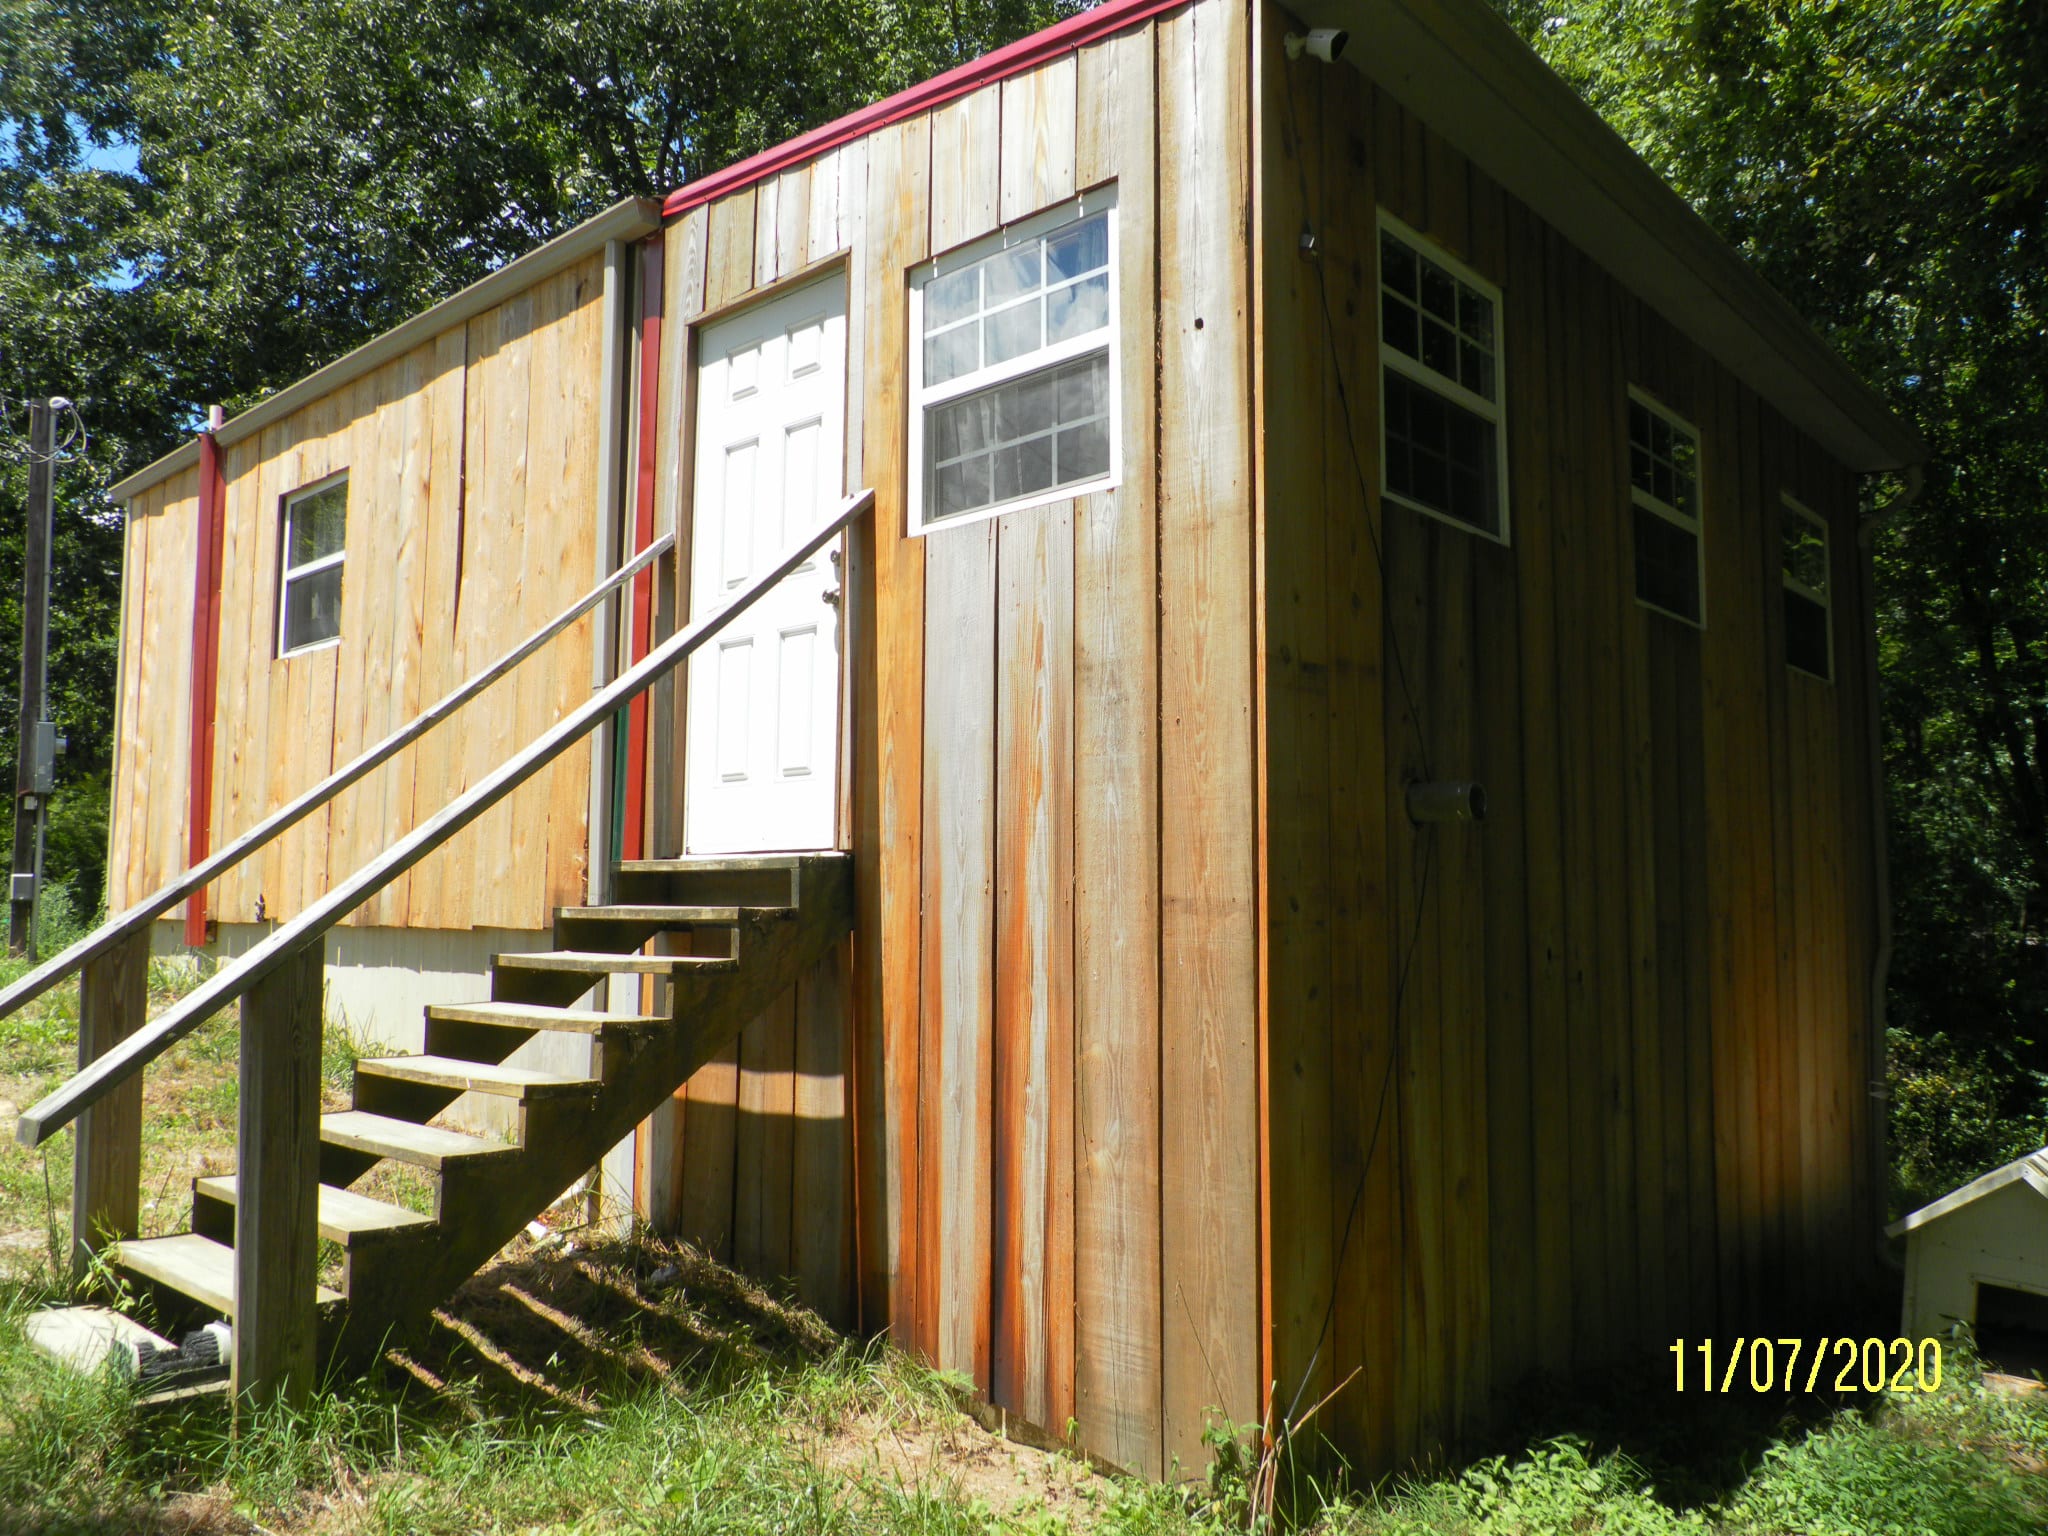 Beautiful cabin right on the Scenic and Historic Upper Cumberland River! Quiet Cabin on the River. Relax and enjoy this quiet cabin with the Cumberland River running by.